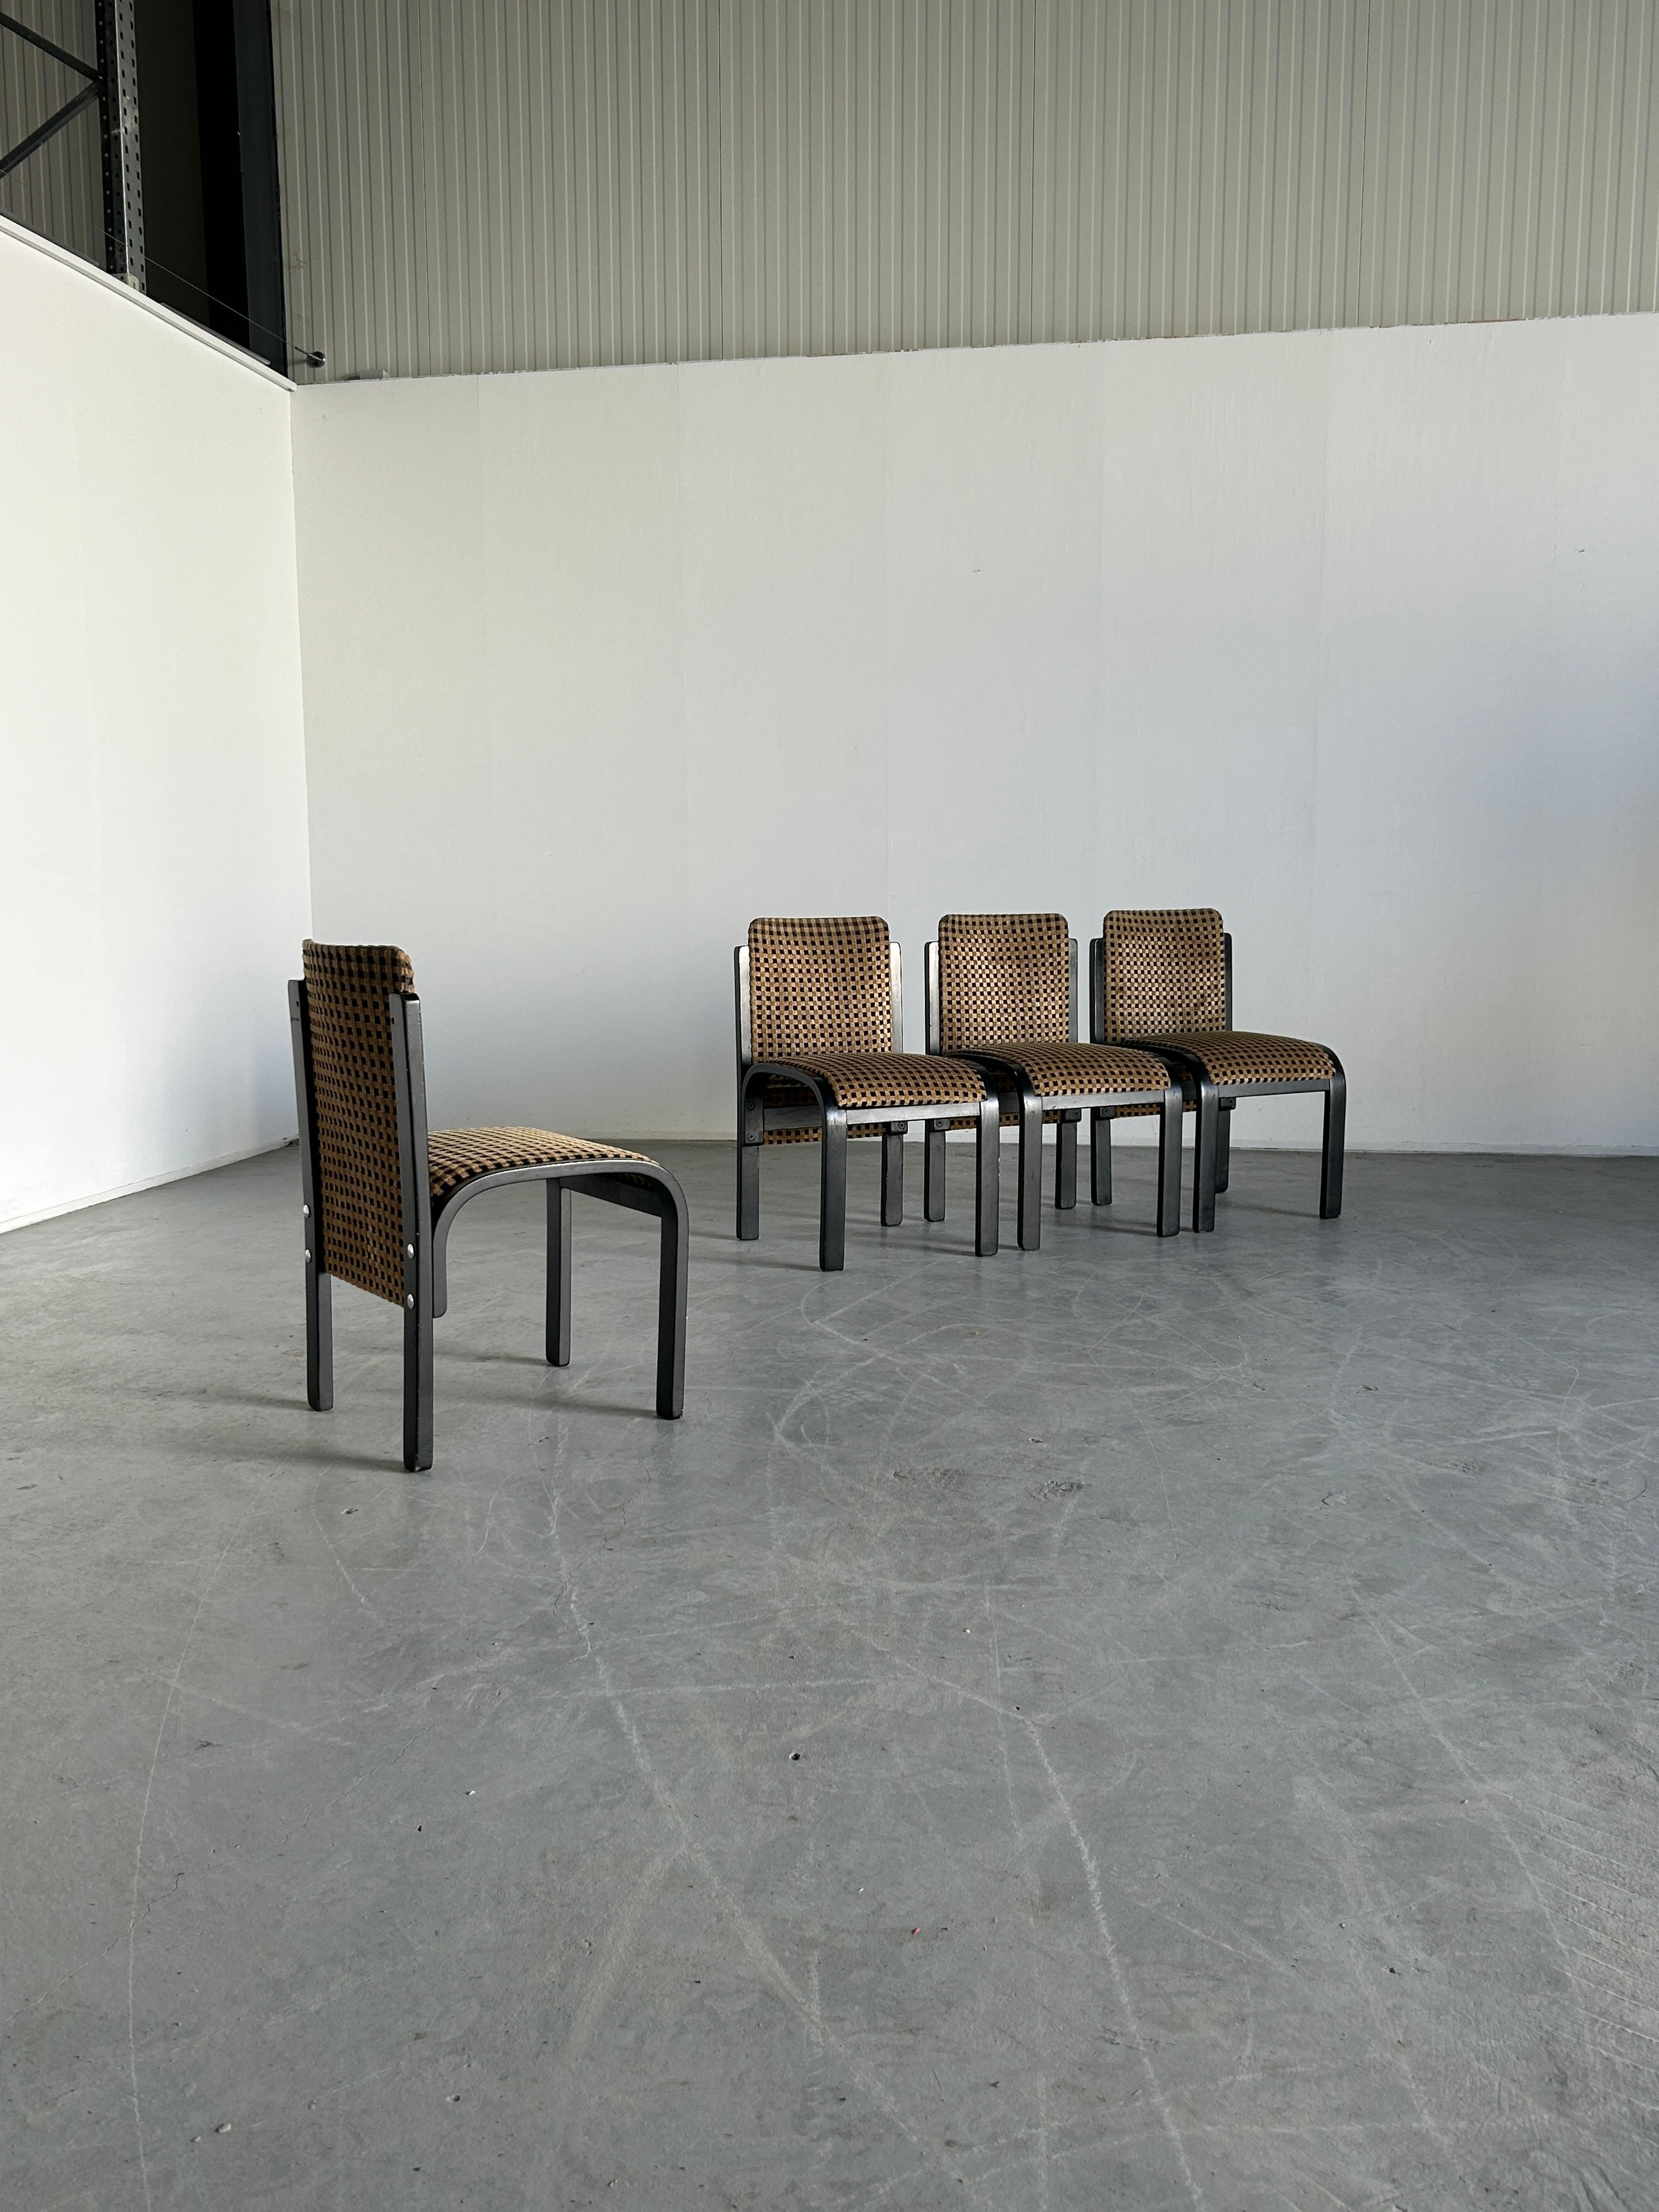 A set of four stunning vintage Italian postmodern sculptural chairs, black lacquered bentwood with chrome hardware, original geometric patterned velvet.
Unknown Italian production, late 1970s or early 1980s.

Overall, the chairs are well preserved,